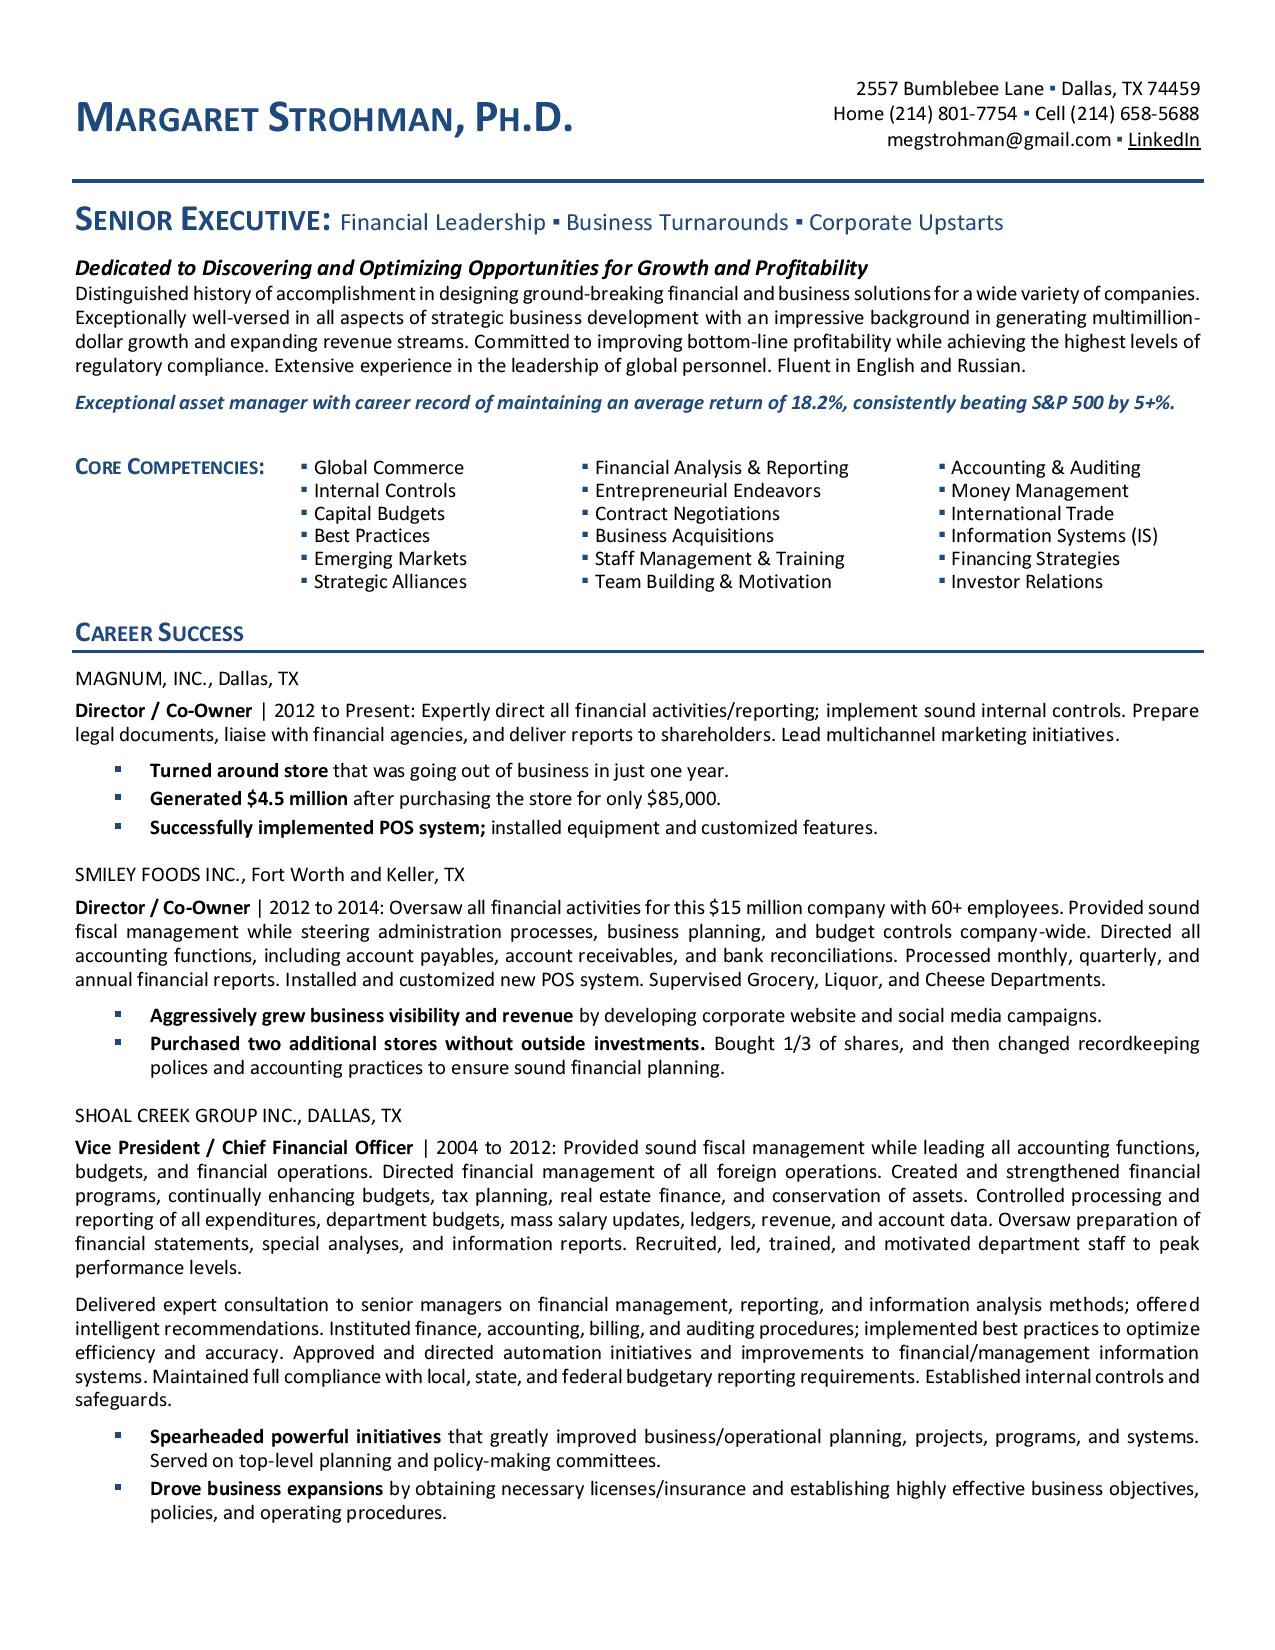 Sample Resume for Senior Contract Specialist Samples – Executive Resume Services